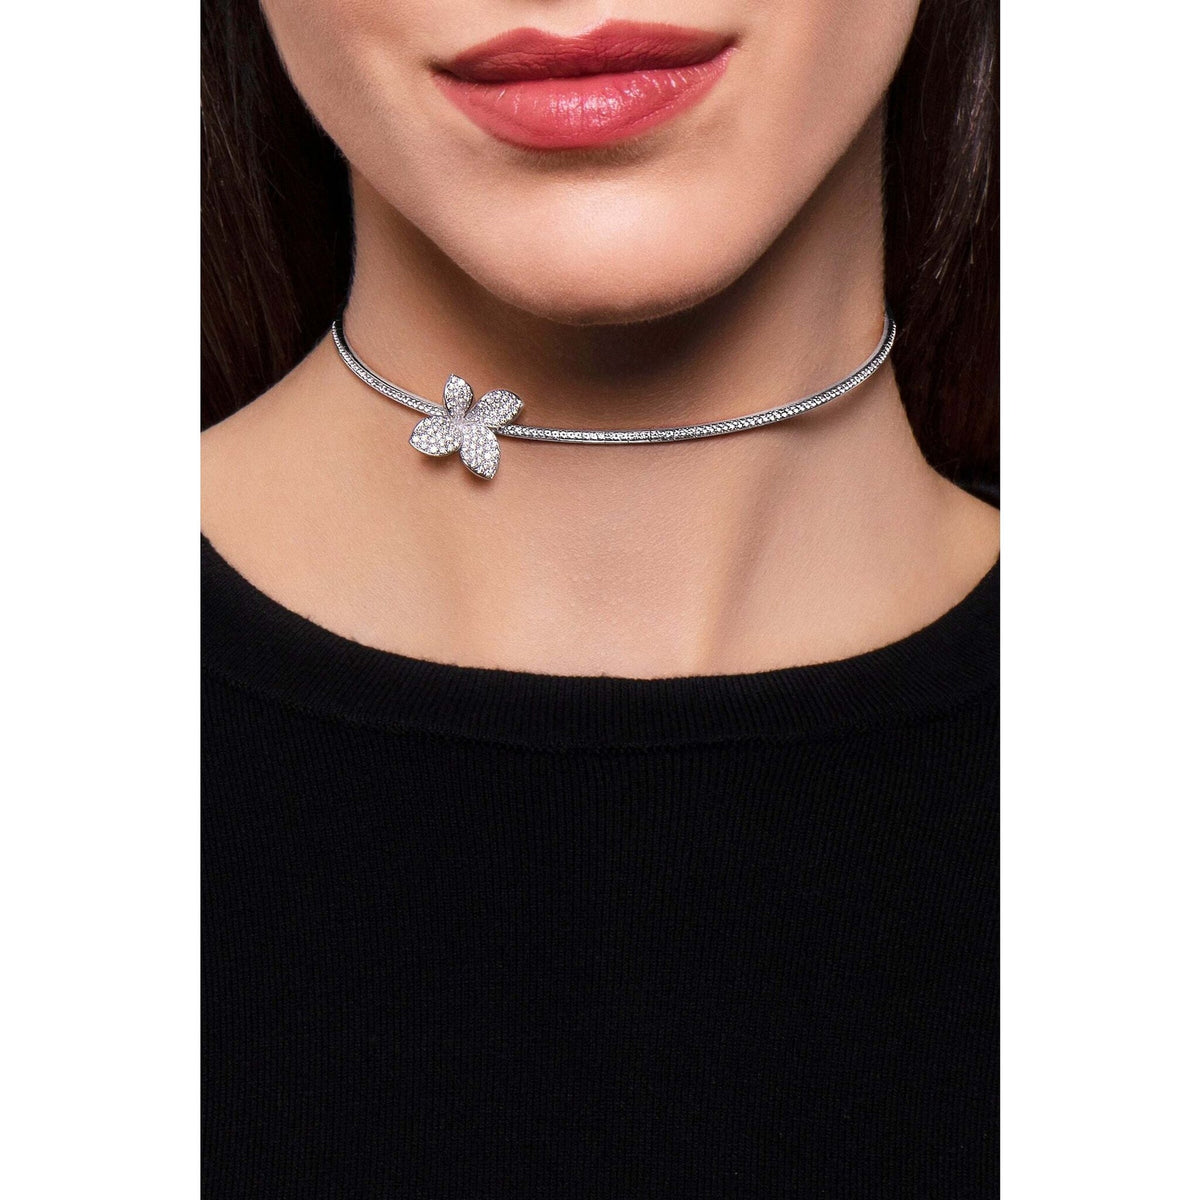 Elegant choker necklace from Robinson's Jewelers